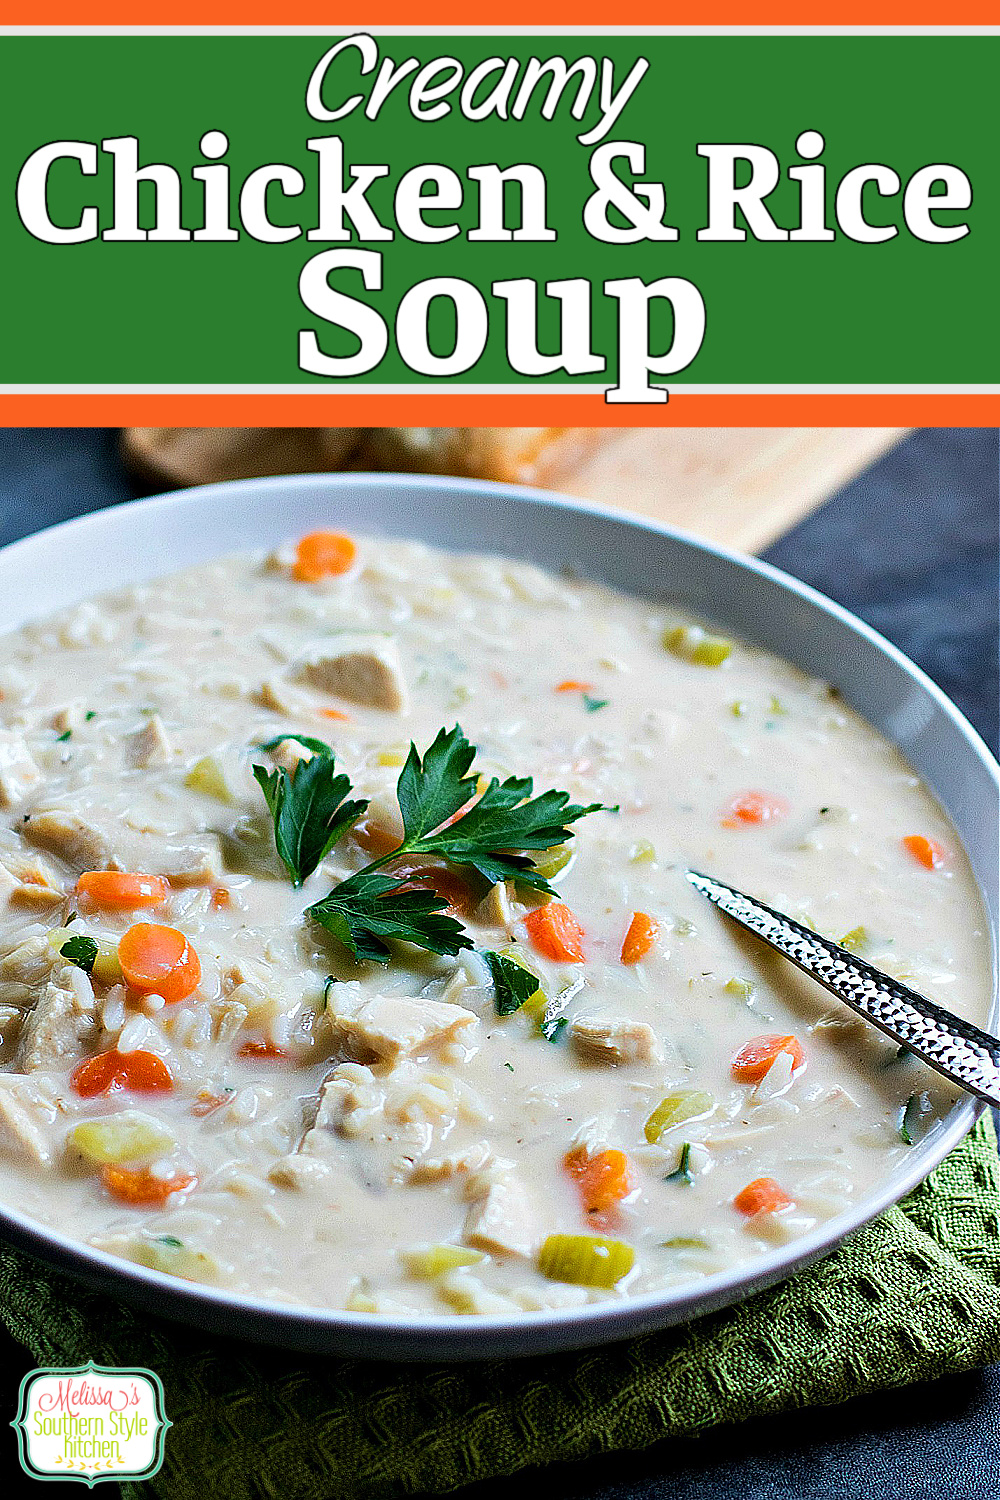 Cozy up to a bowl of Easy Creamy Chicken Rice Soup for dinner tonight #chickenricesoup #chickensoup #creamychicken #chickenrecipes #souprecipes #easyrecipes #chicken #soup #food #recipes #dinnerideas #dinner #southernrecipes #southernfood #meloissassouthernstylekitchen via @melissasssk